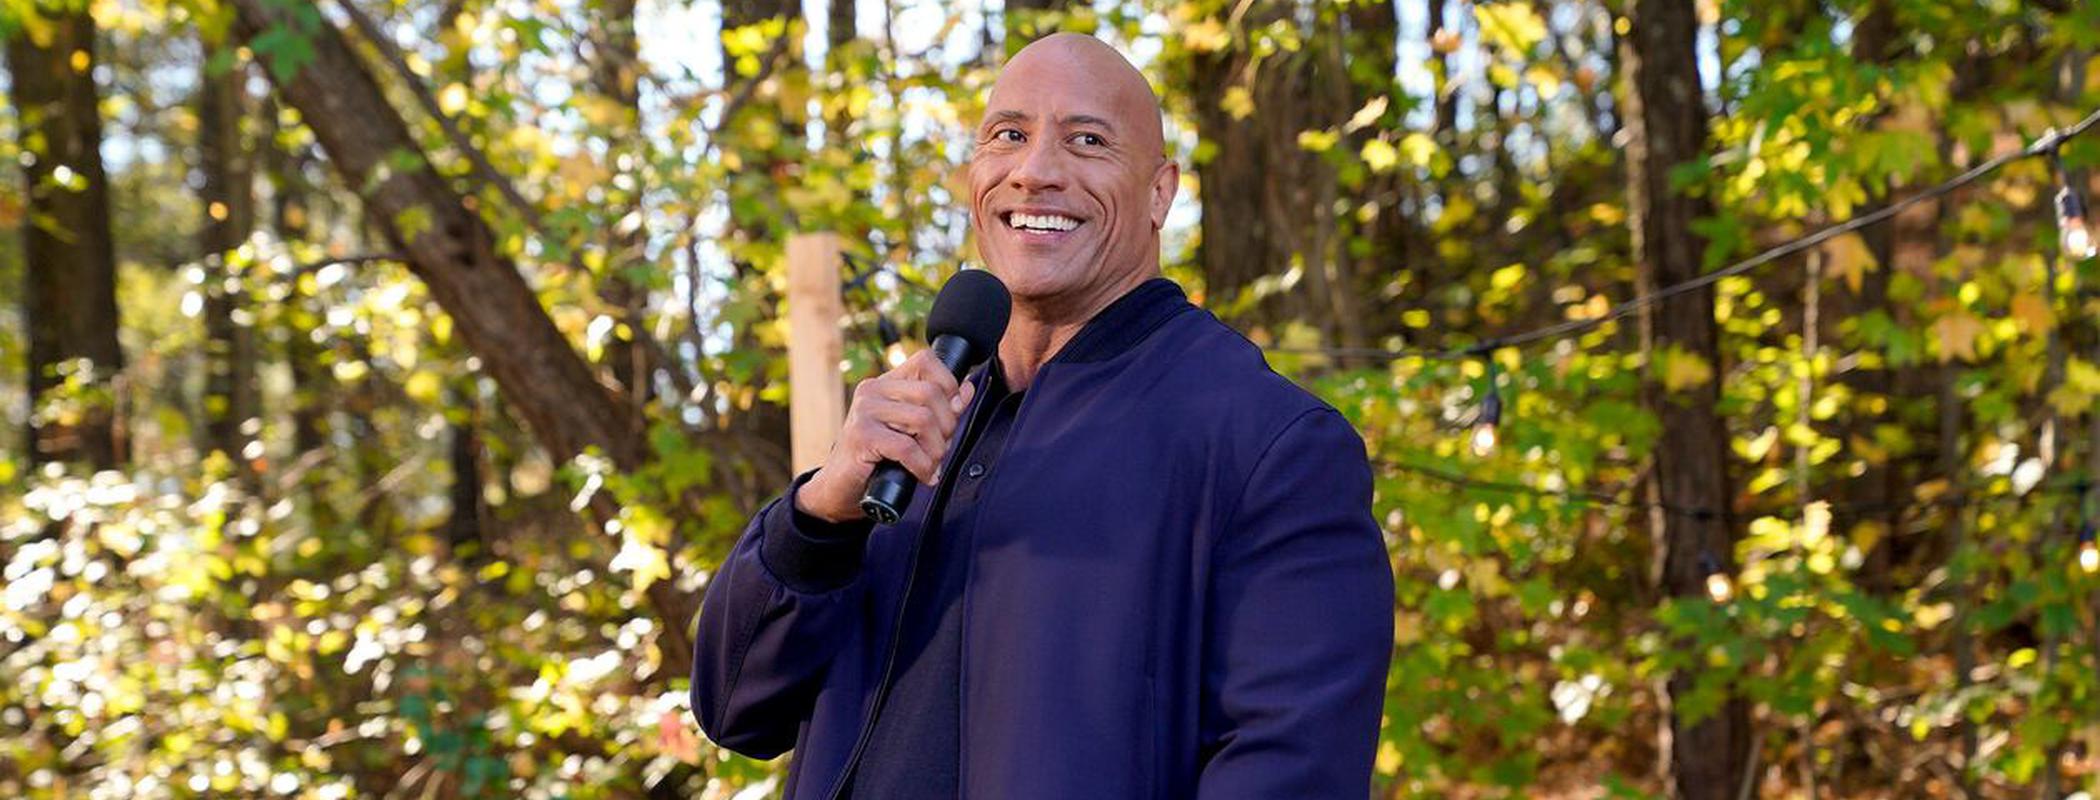 Who Stars As Young Rock In Dwayne Johnson's New NBC Comedy? Find Out Here!, Adrian Groulx, Bradley Constant, Dwayne Johnson, Television, Uli  Latukefu, Young Rock